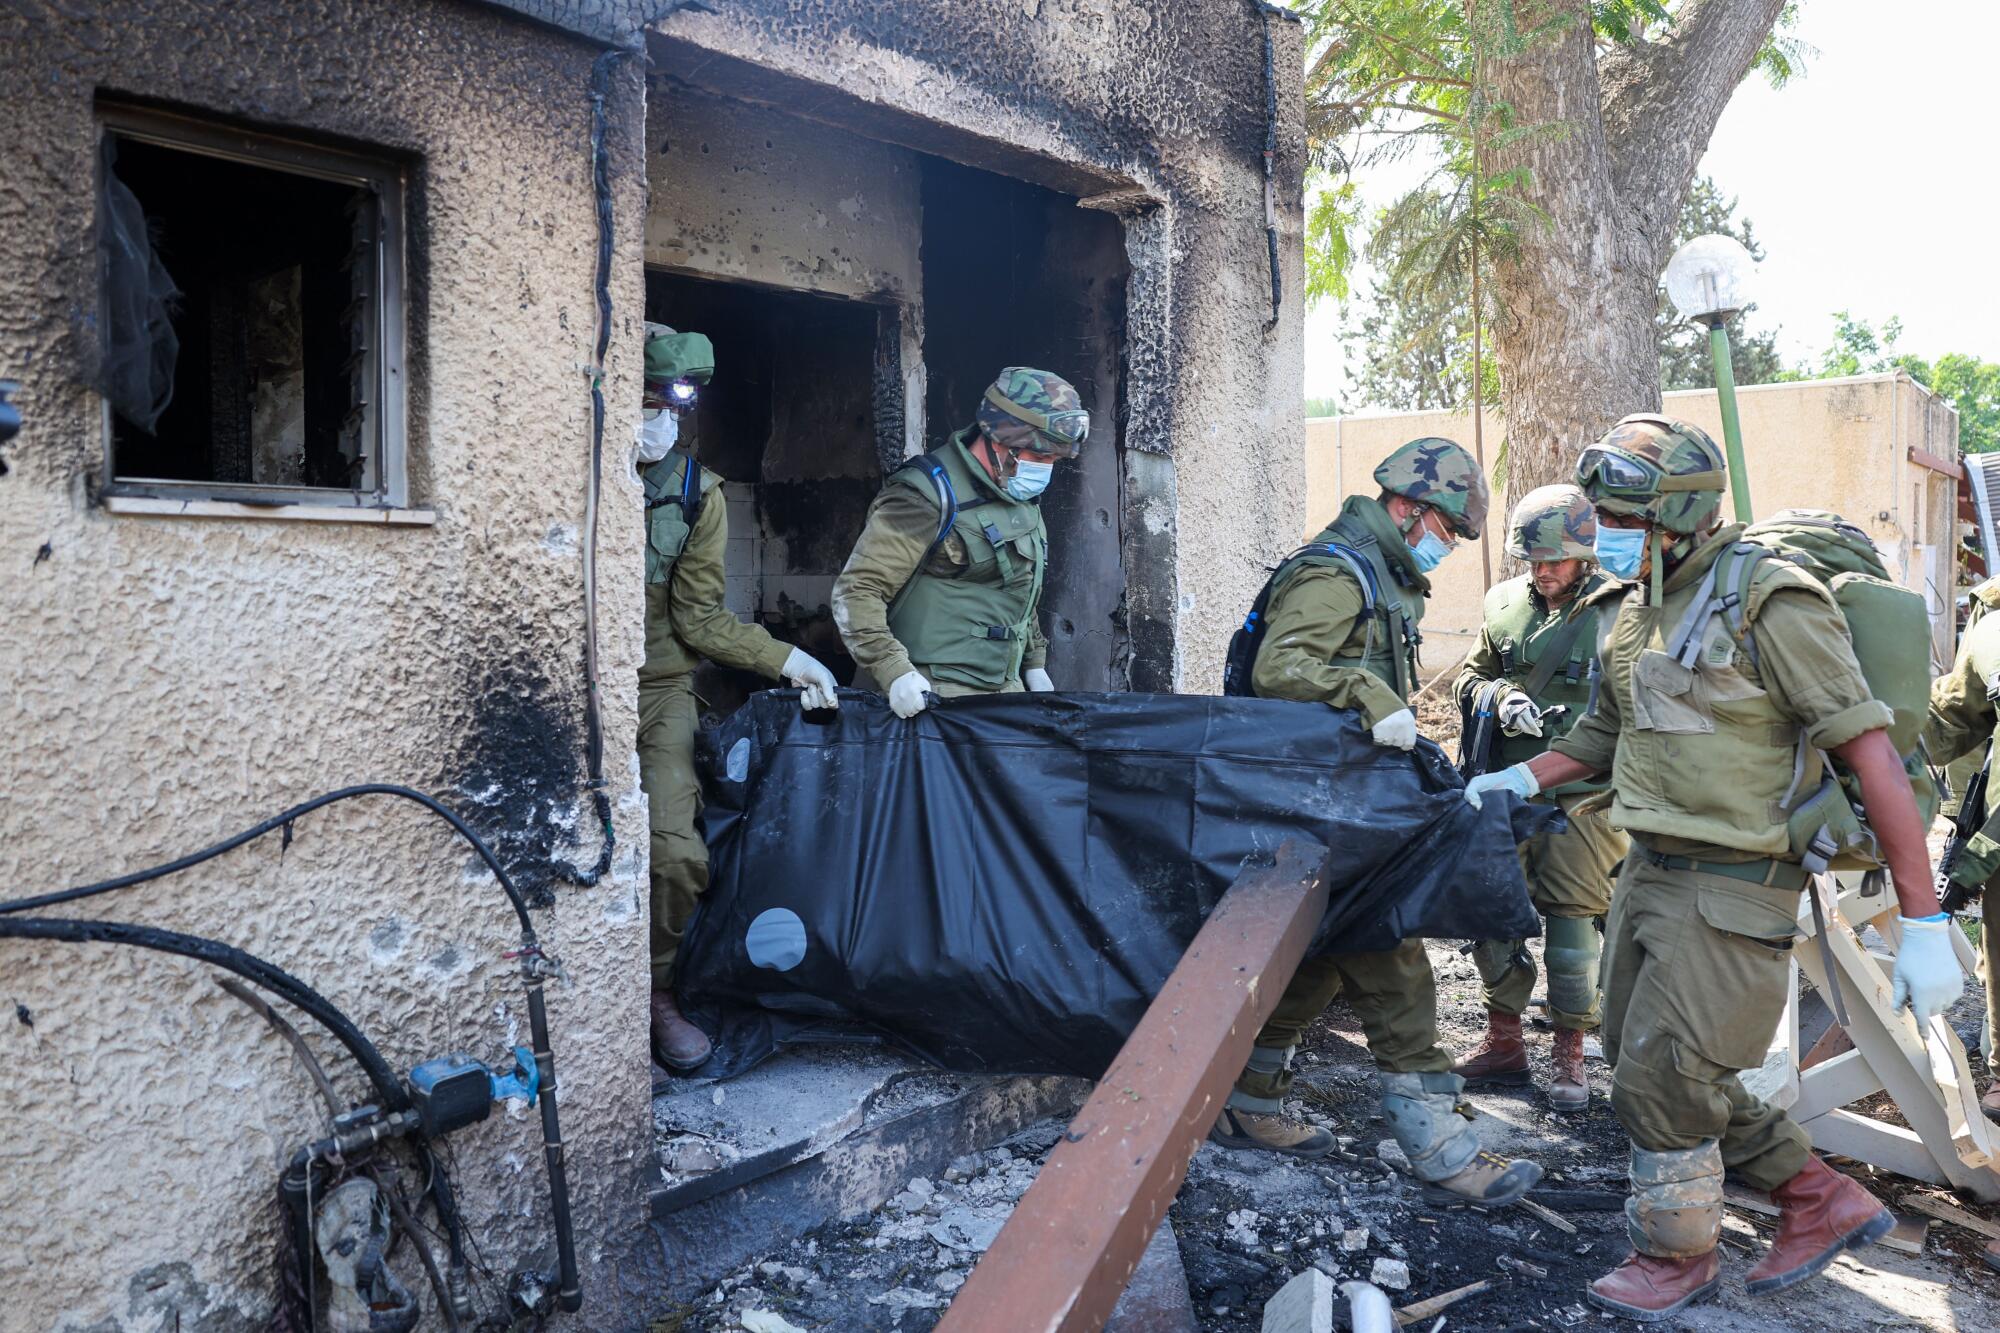 Israeli soldiers remove the body of a compatriot from a building.